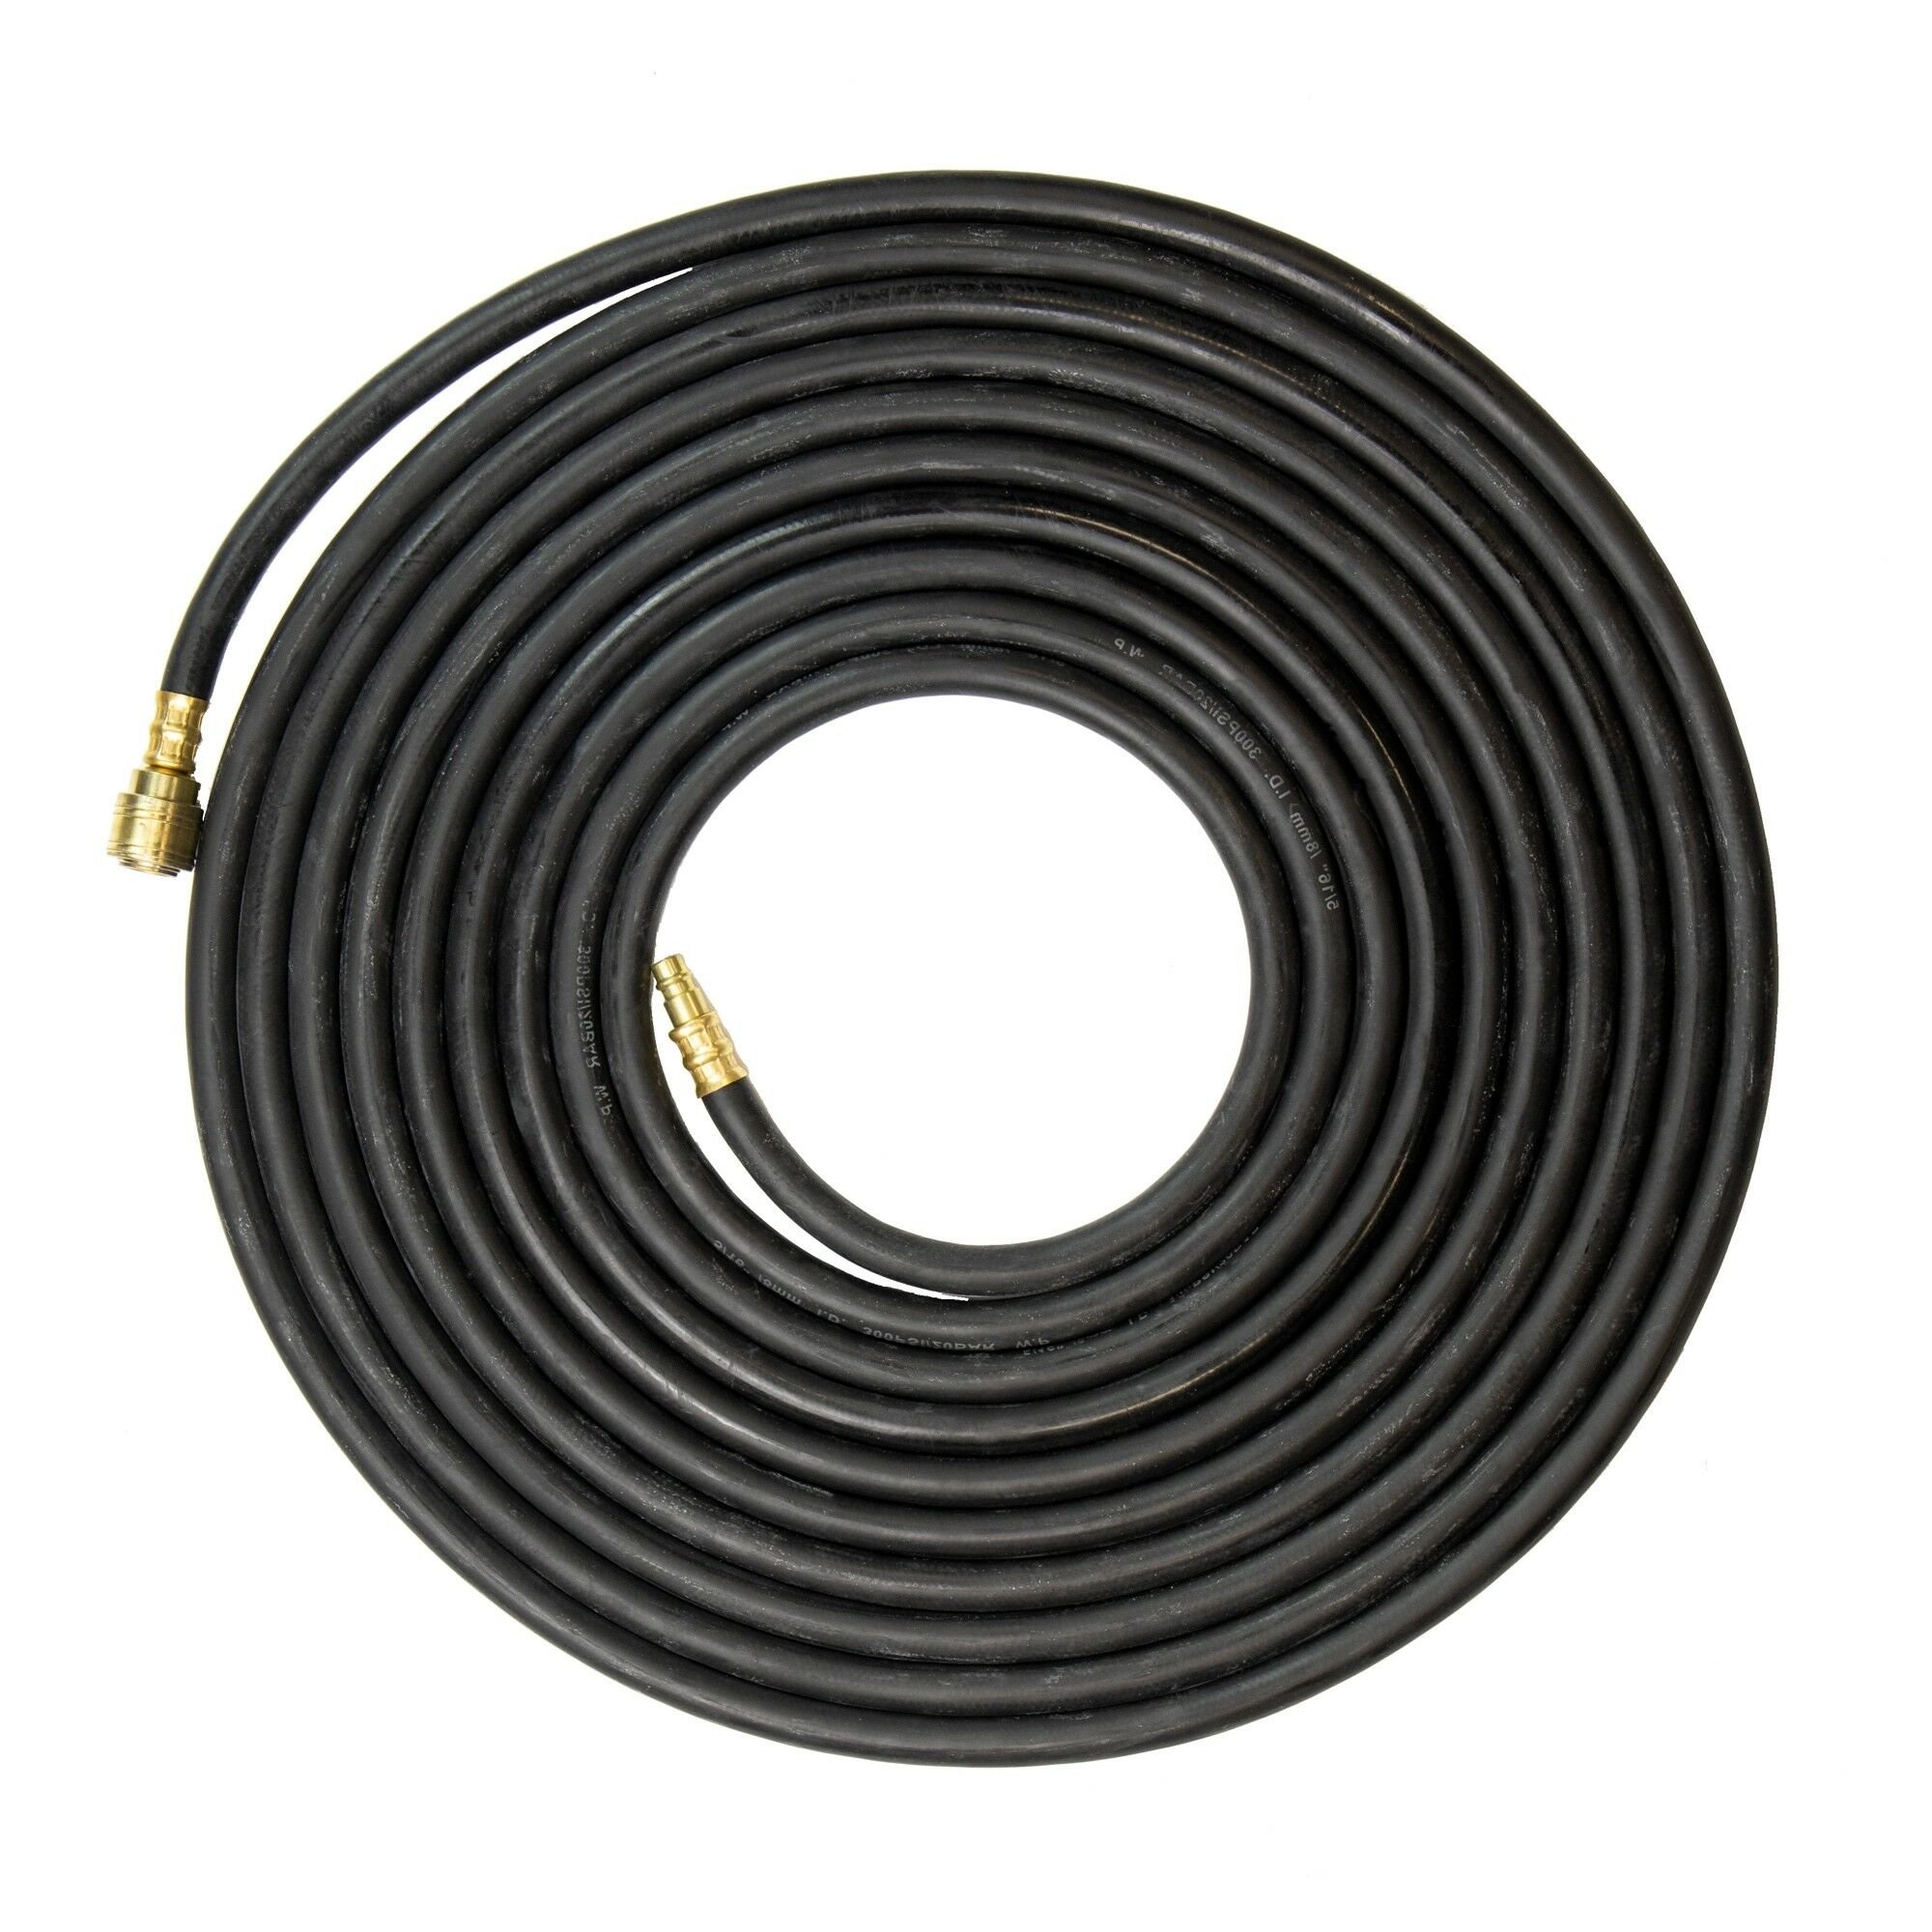 SGS 8mm Rubber Air Compressor Hose With Quick Couplers - 10m